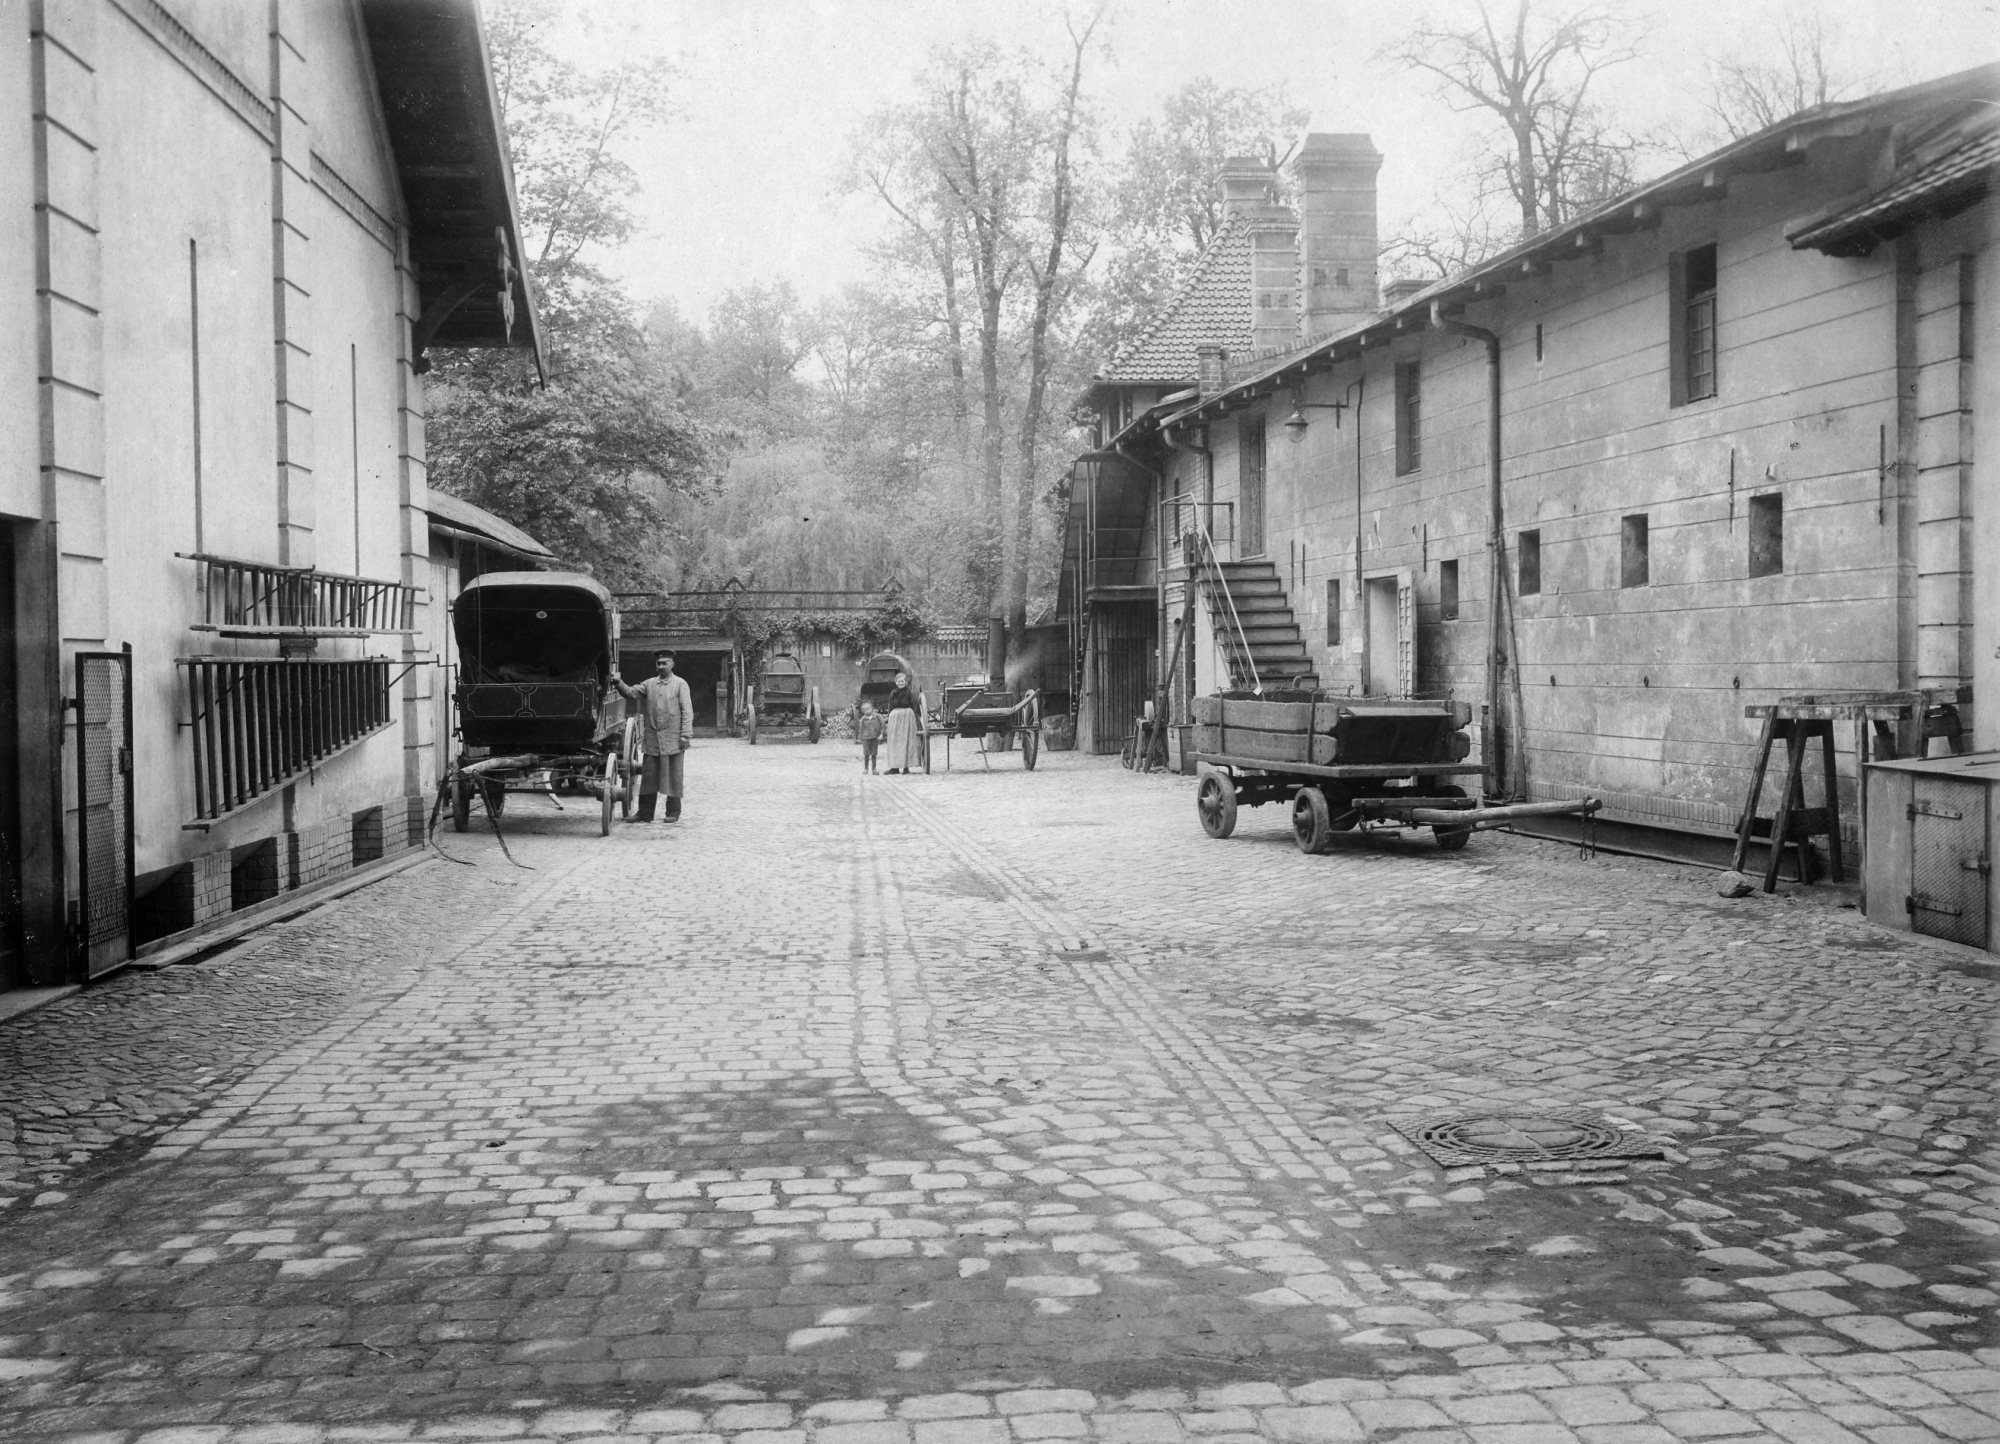 Black and white photograph: Wide, paved path, buildings to the left and right, trees in the background. On the left-hand side of the path, we can see a man standing next to a carriage. Further back, on the right, carts and equipment can be seen.